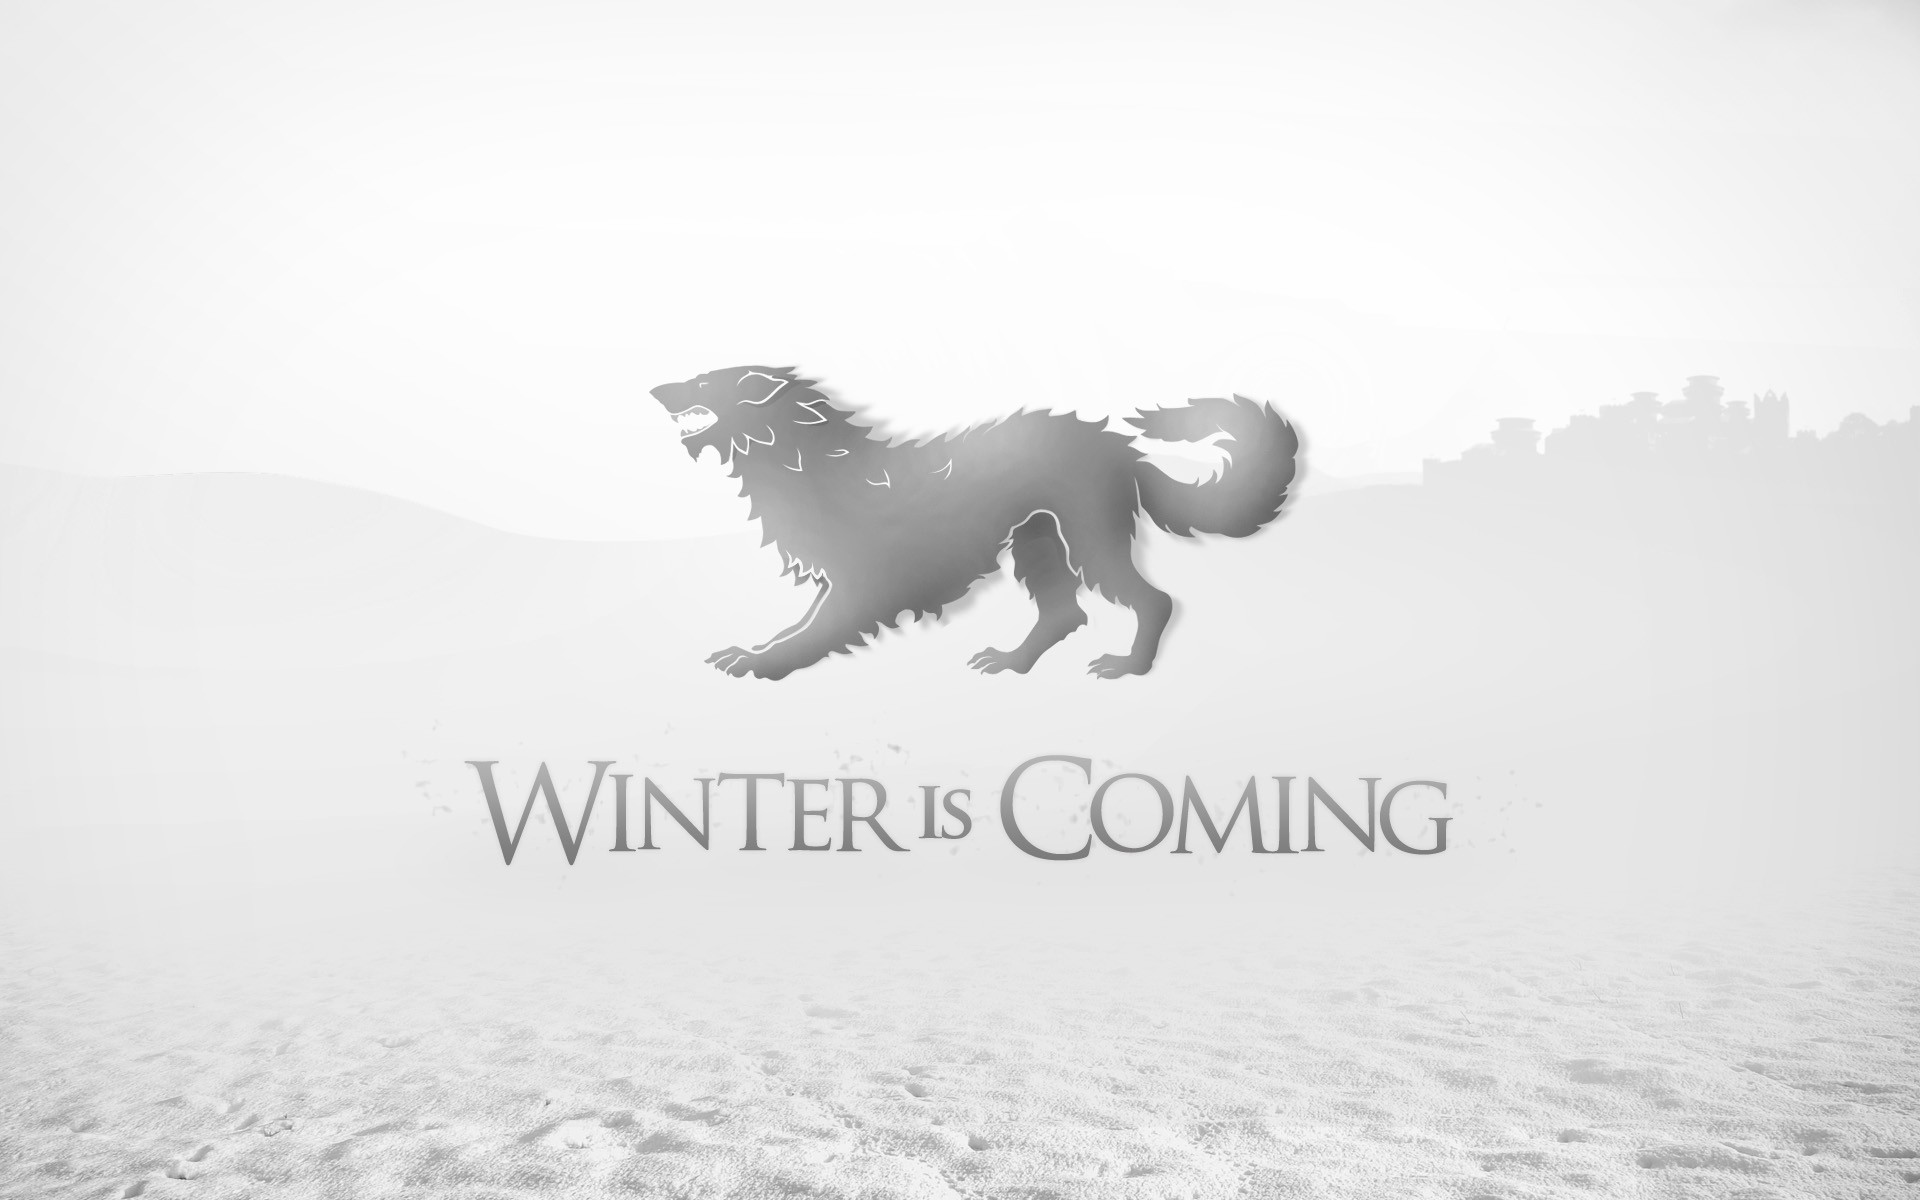 game, Of, Thrones, A, Song, Of, Ice, And, Fire, Tv, Series, Winter, Is, Coming, Direwolf, House, Stark, Wolves Wallpaper